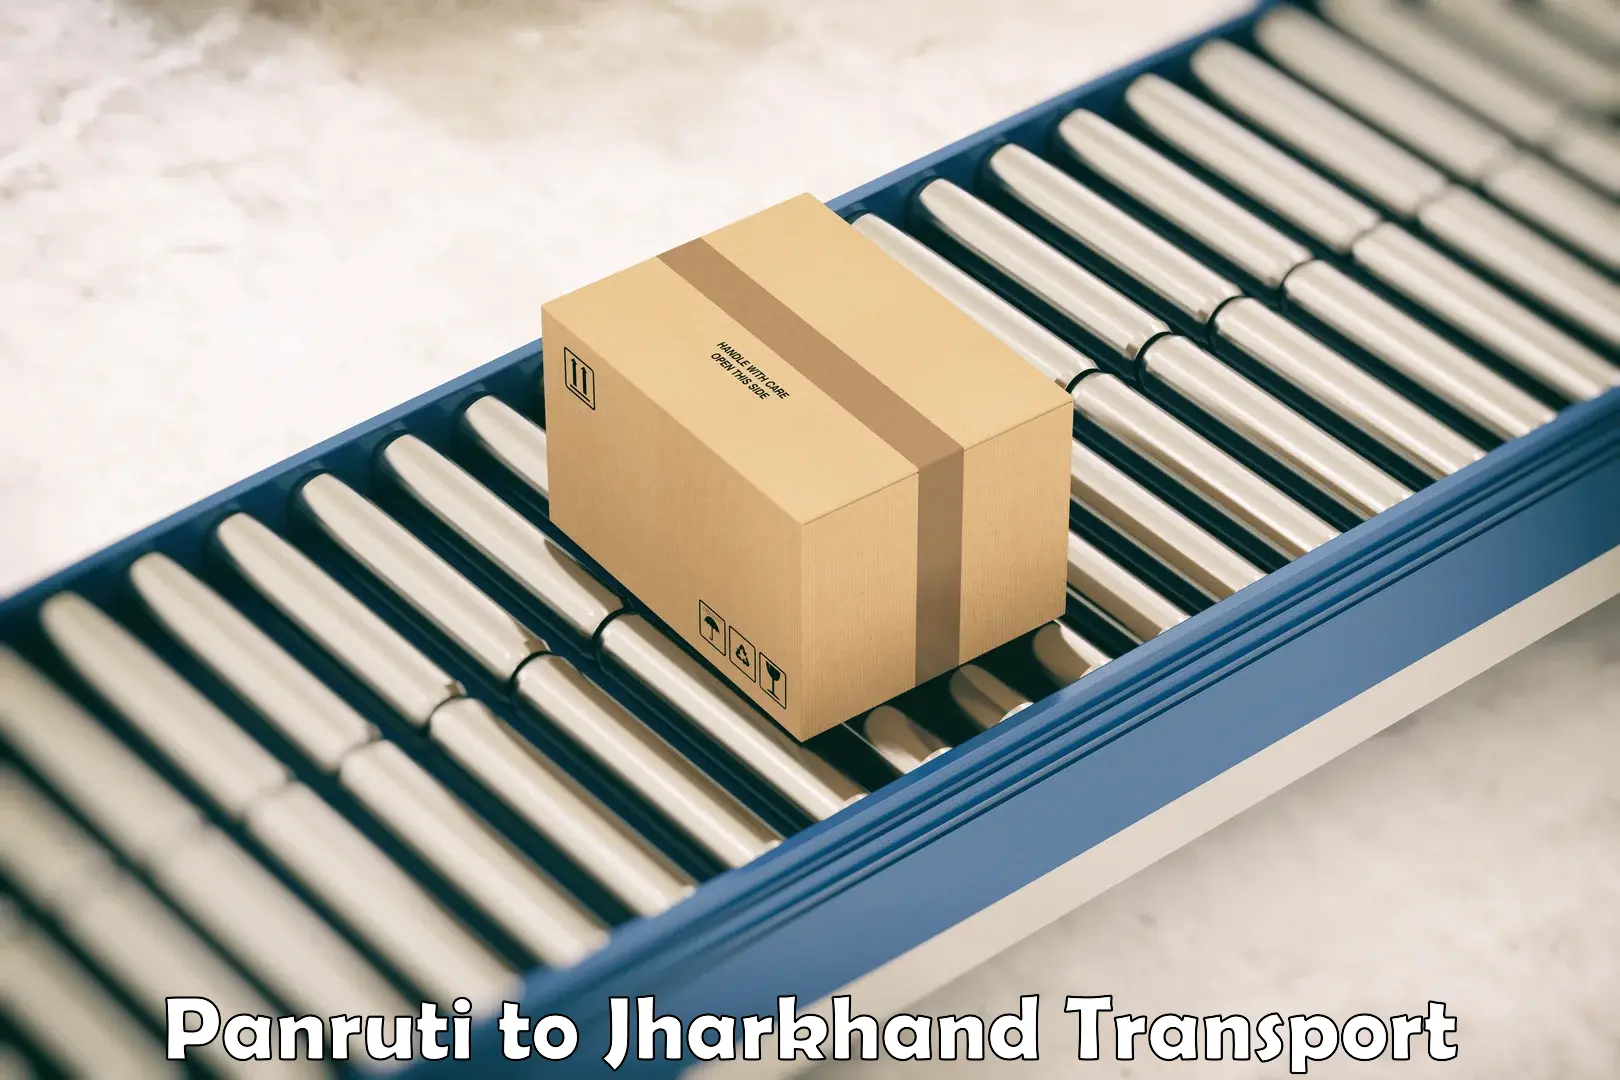 Land transport services in Panruti to Jharkhand